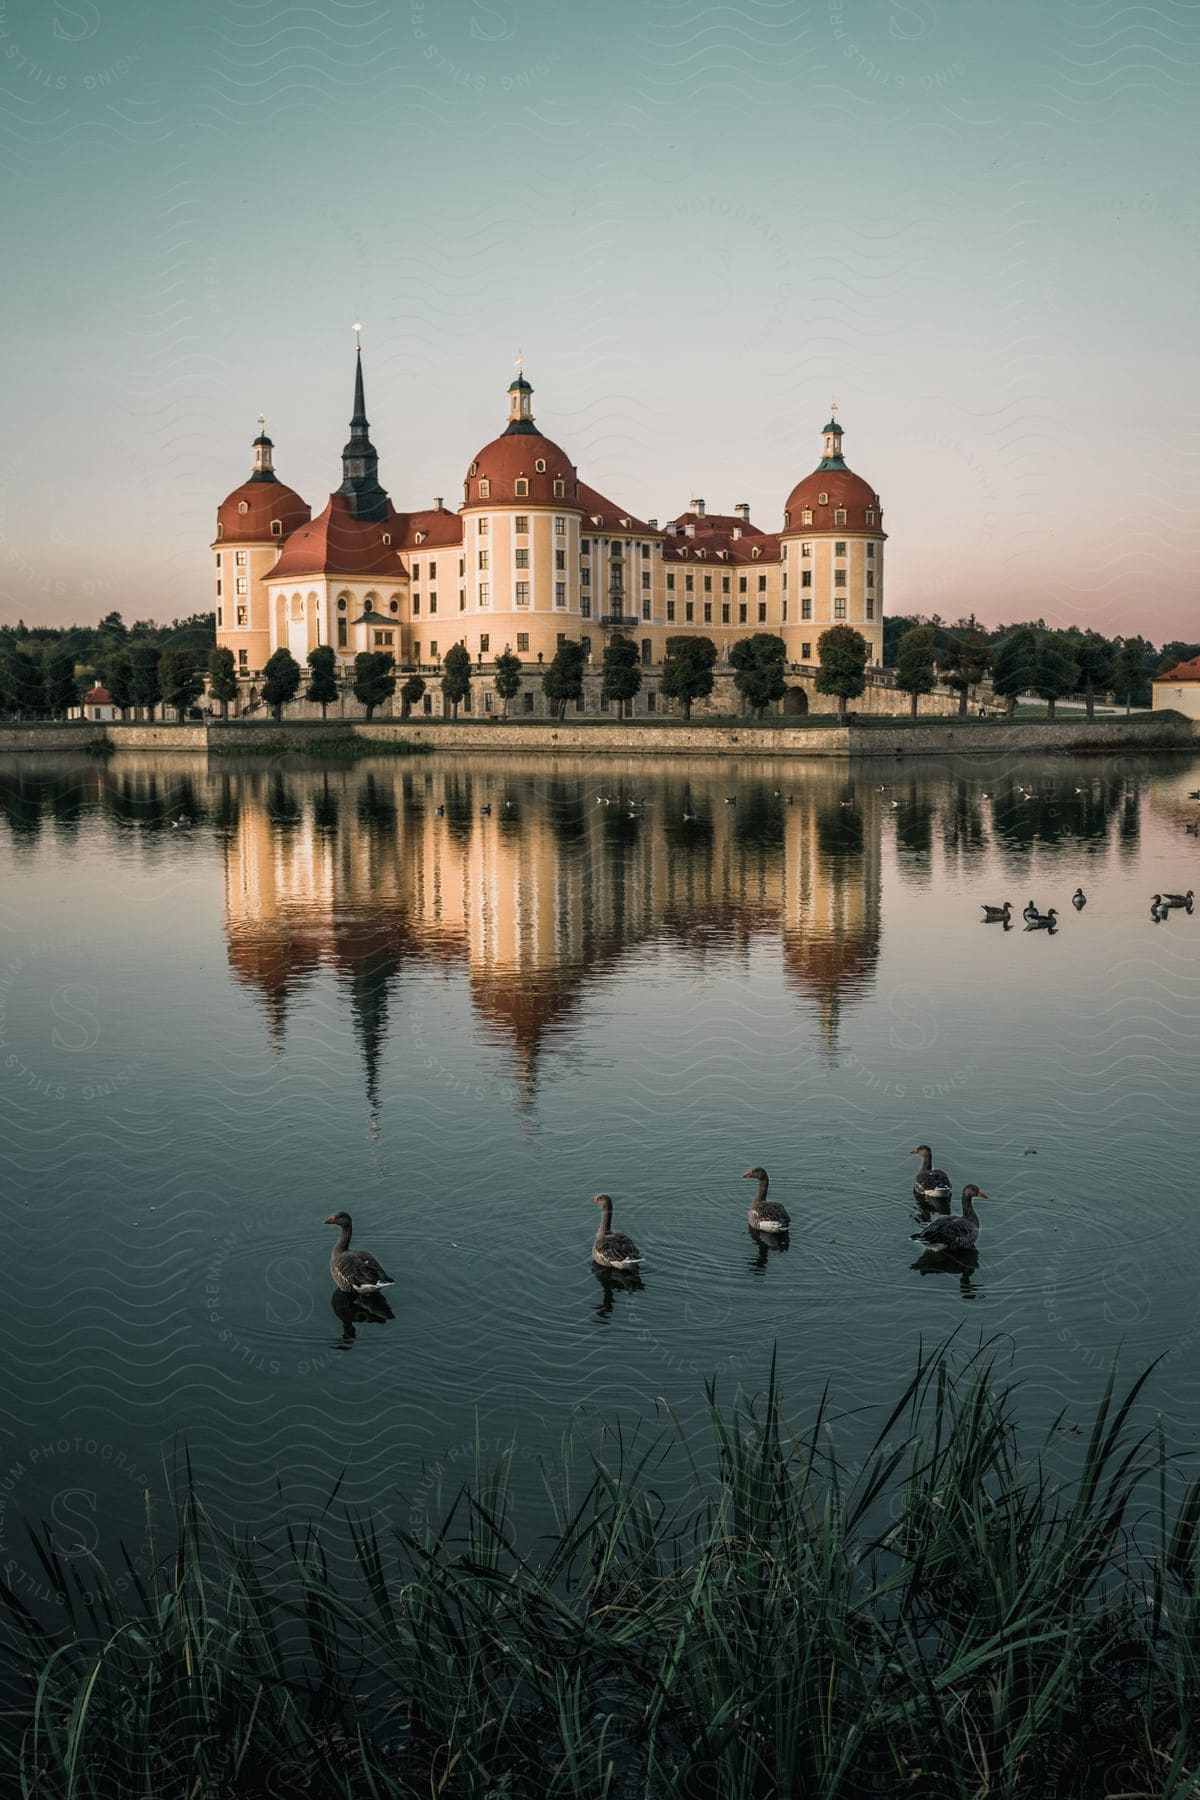 Moritzburg Castle stands tall beside a serene lake, where ducks gracefully float on the tranquil waters.